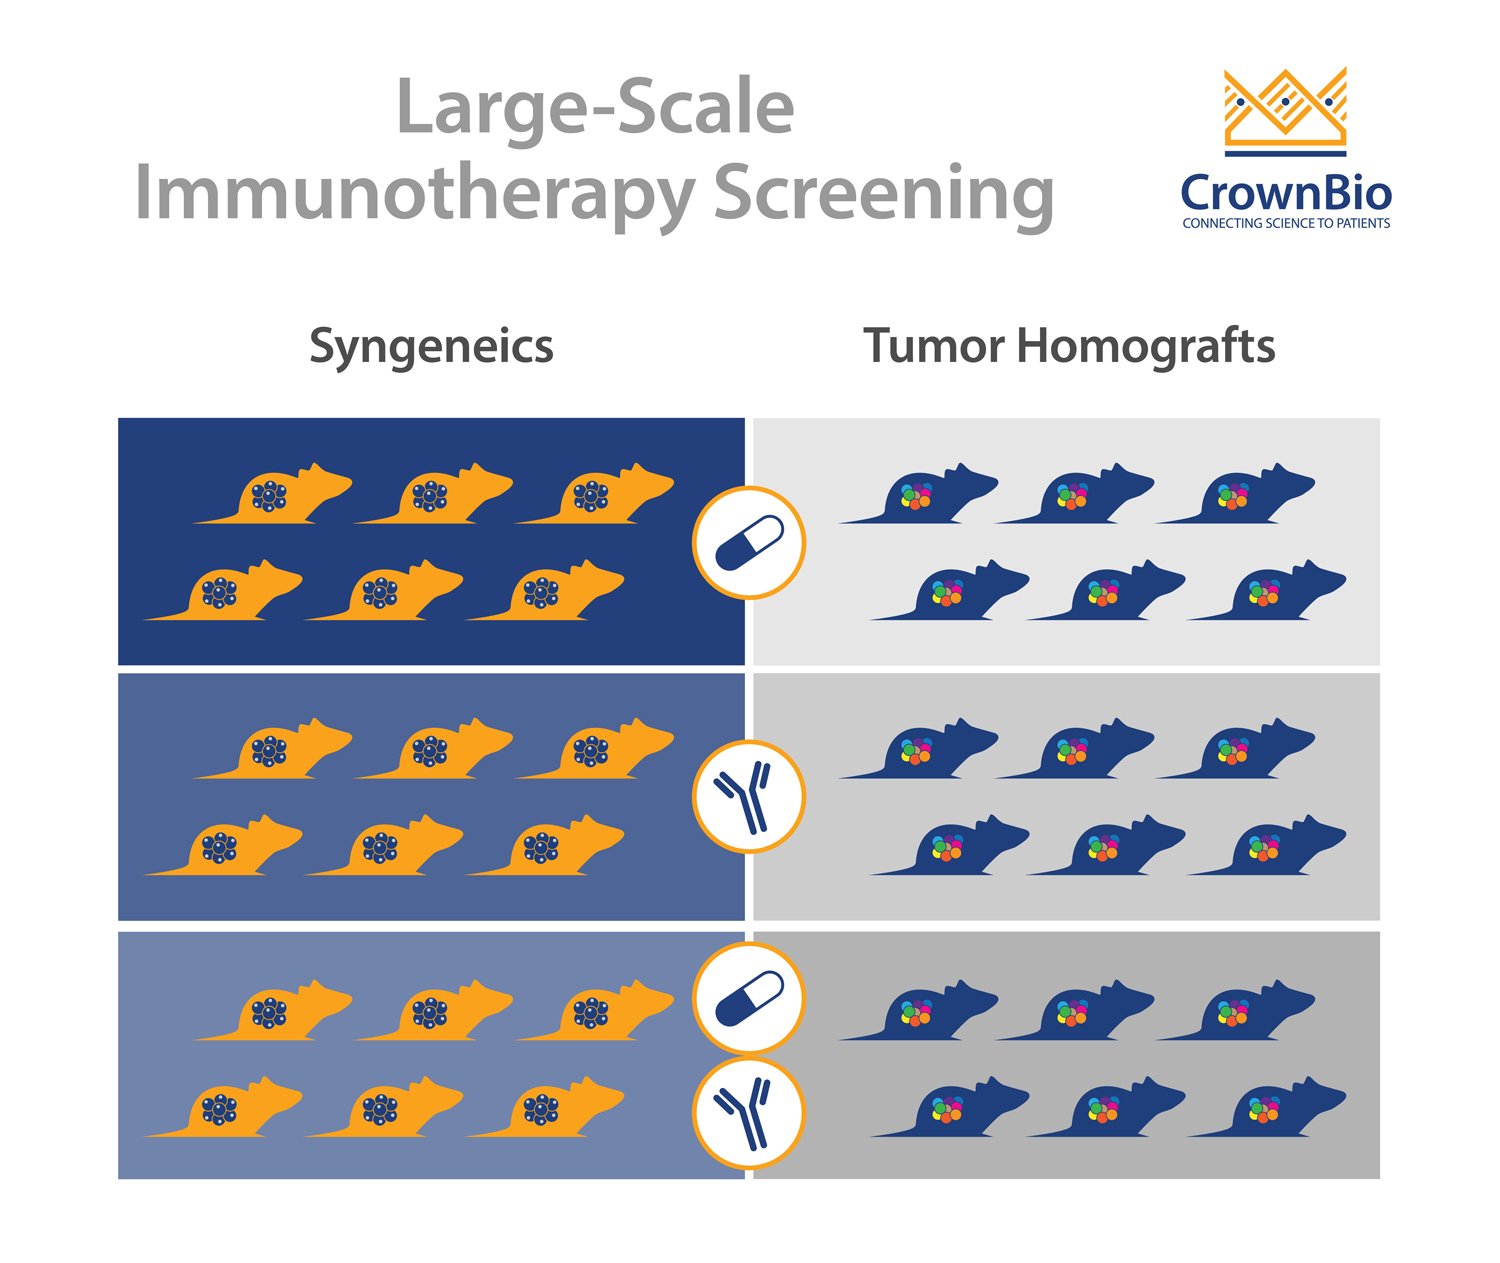 Large-Scale Immunotherapy Screening: How and Why?